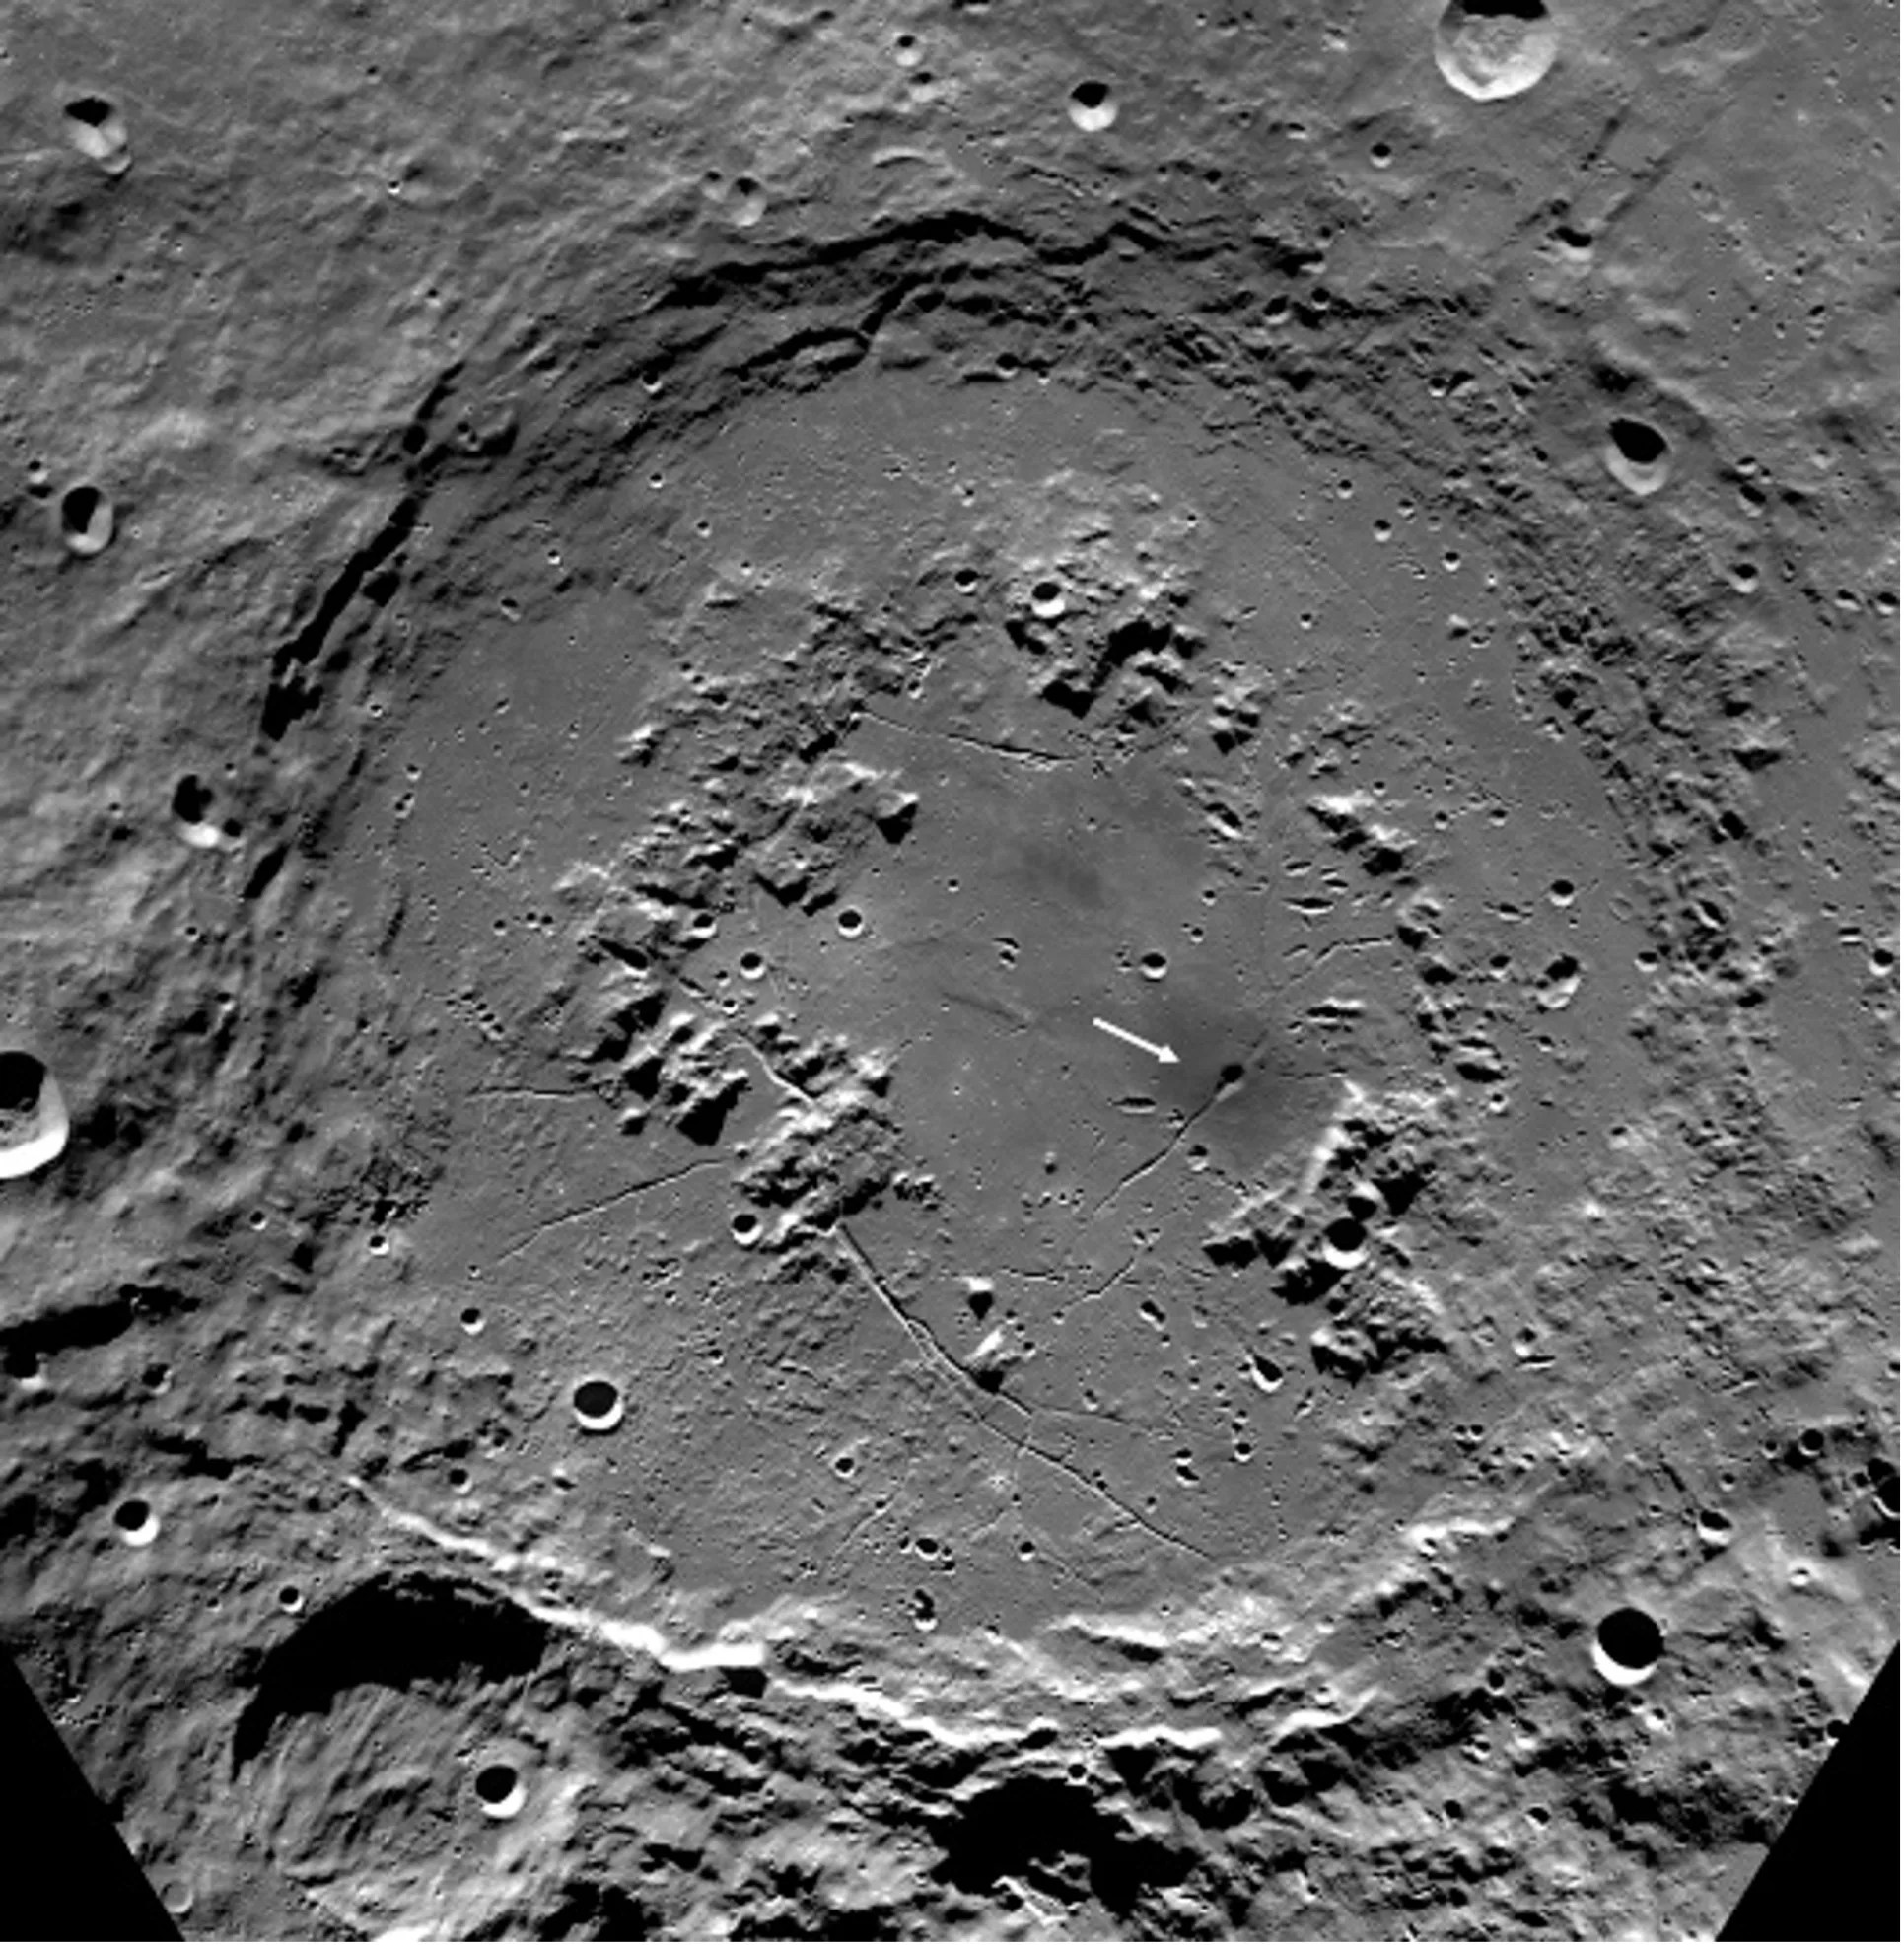 The image is zoomed in on the lunar impact crater known as Schrödinger Basin, appearing as a prominent ring formed by topographic shadows. Inside the crater sits a smaller ring of structures comprised of volcanic formations. The basin floor appears otherwise to be relatively flat; these smooth deposits are thought to be be a combination of impact melt and volcanic material.